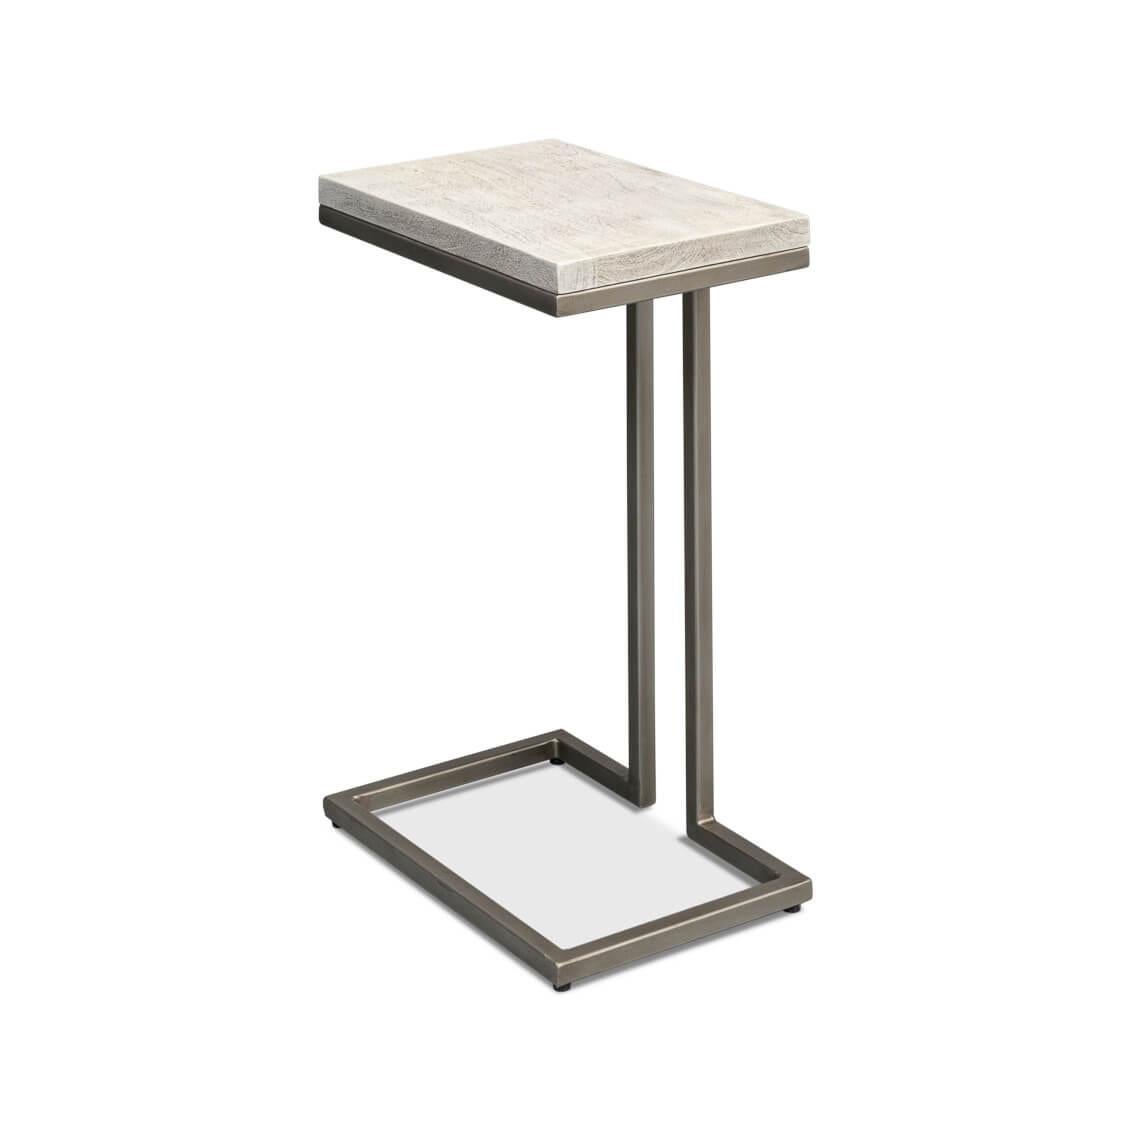 Minimalist Modernist Accent Table For Sale